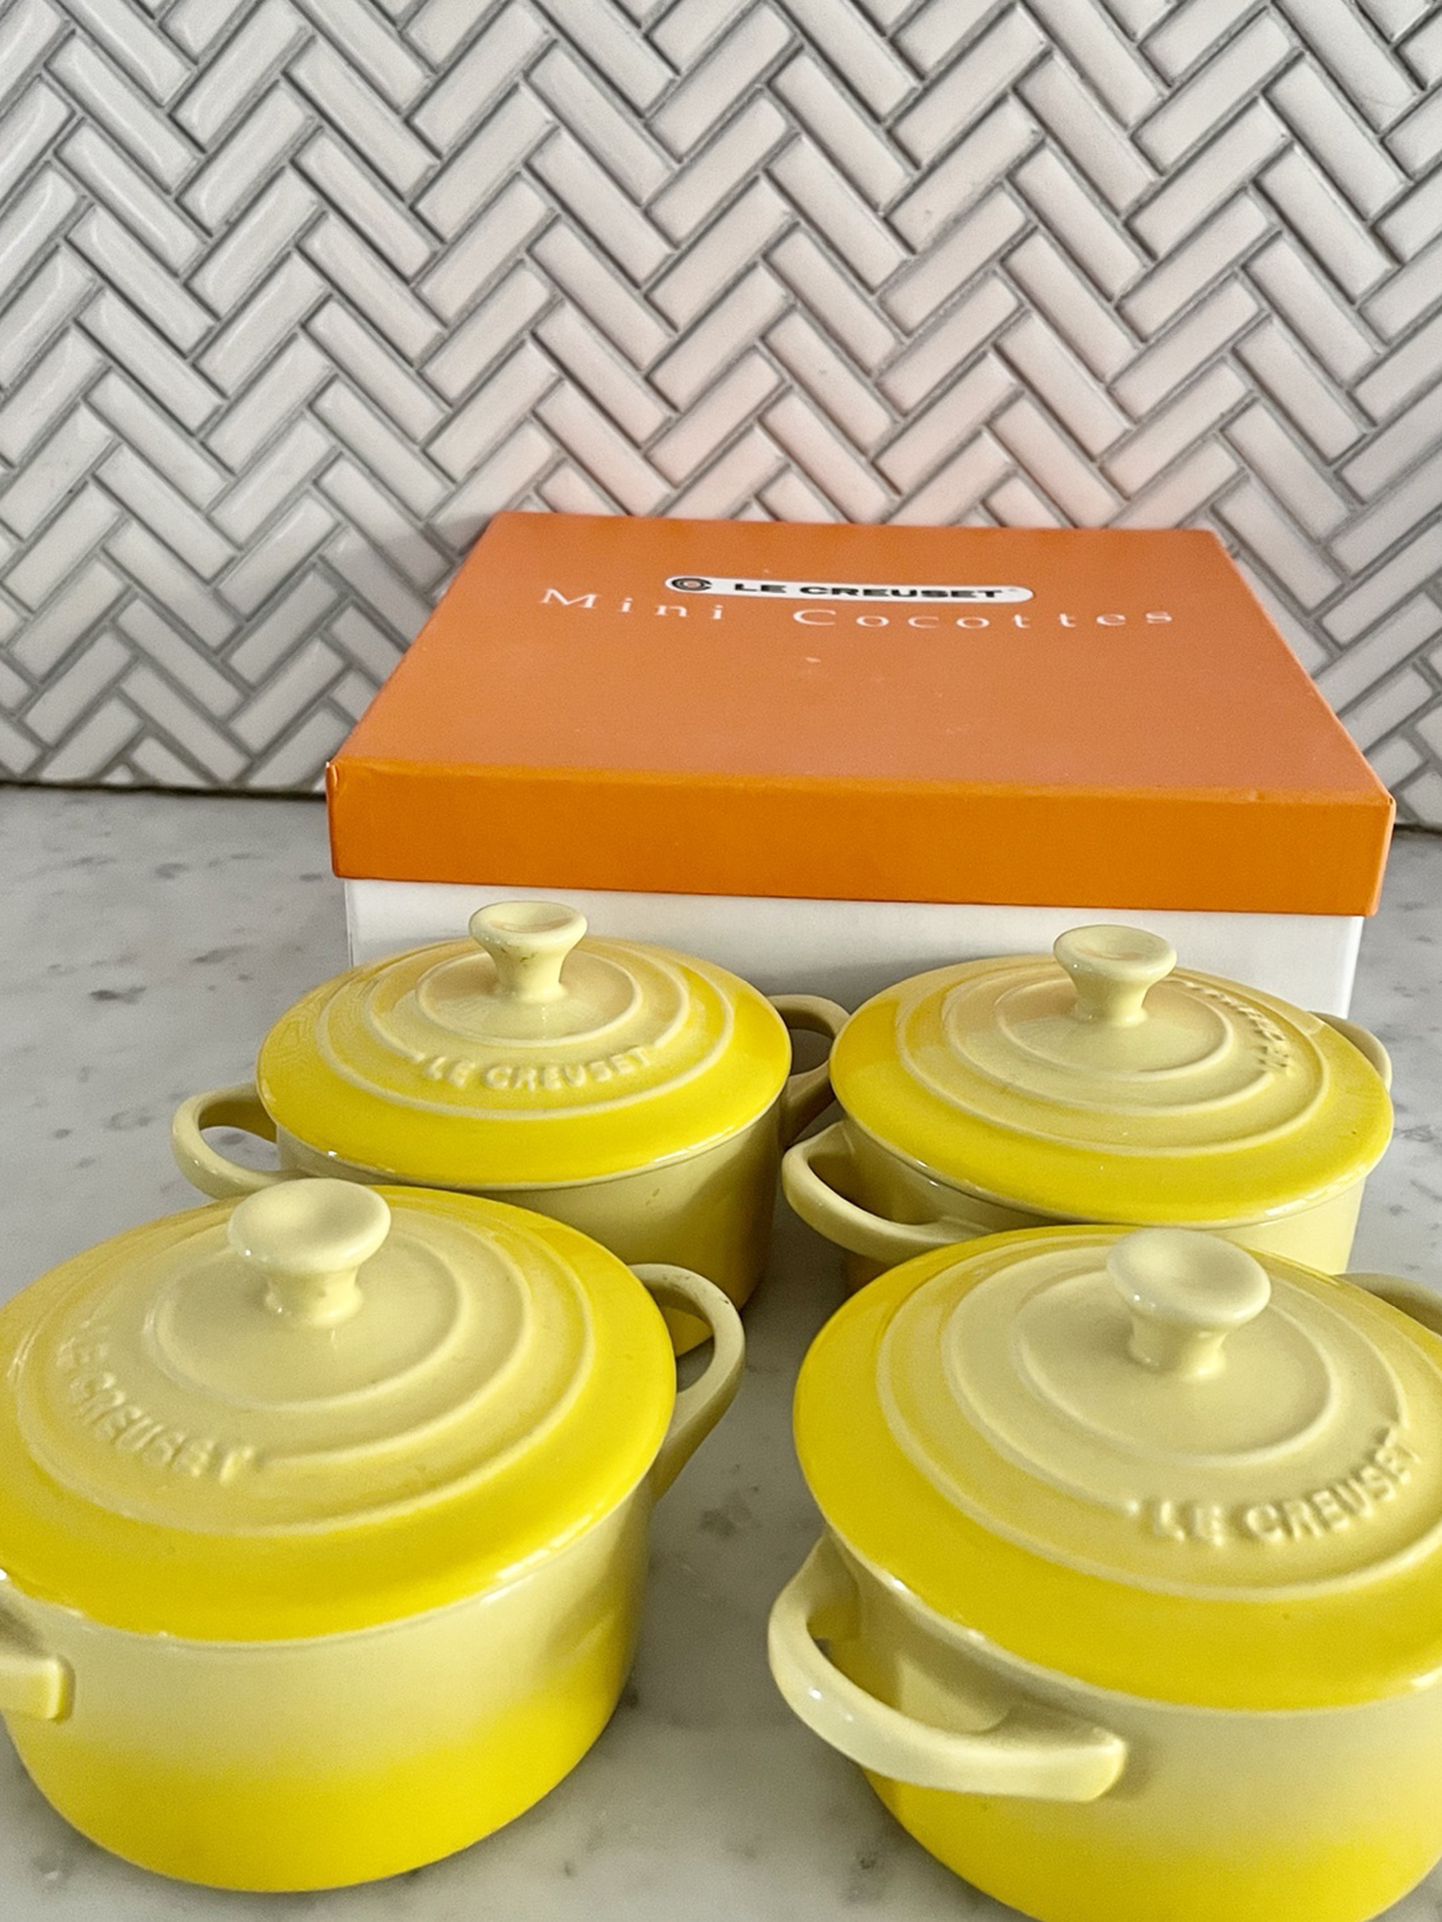 Creuset Mini Cocottes for Sale in Los - OfferUp